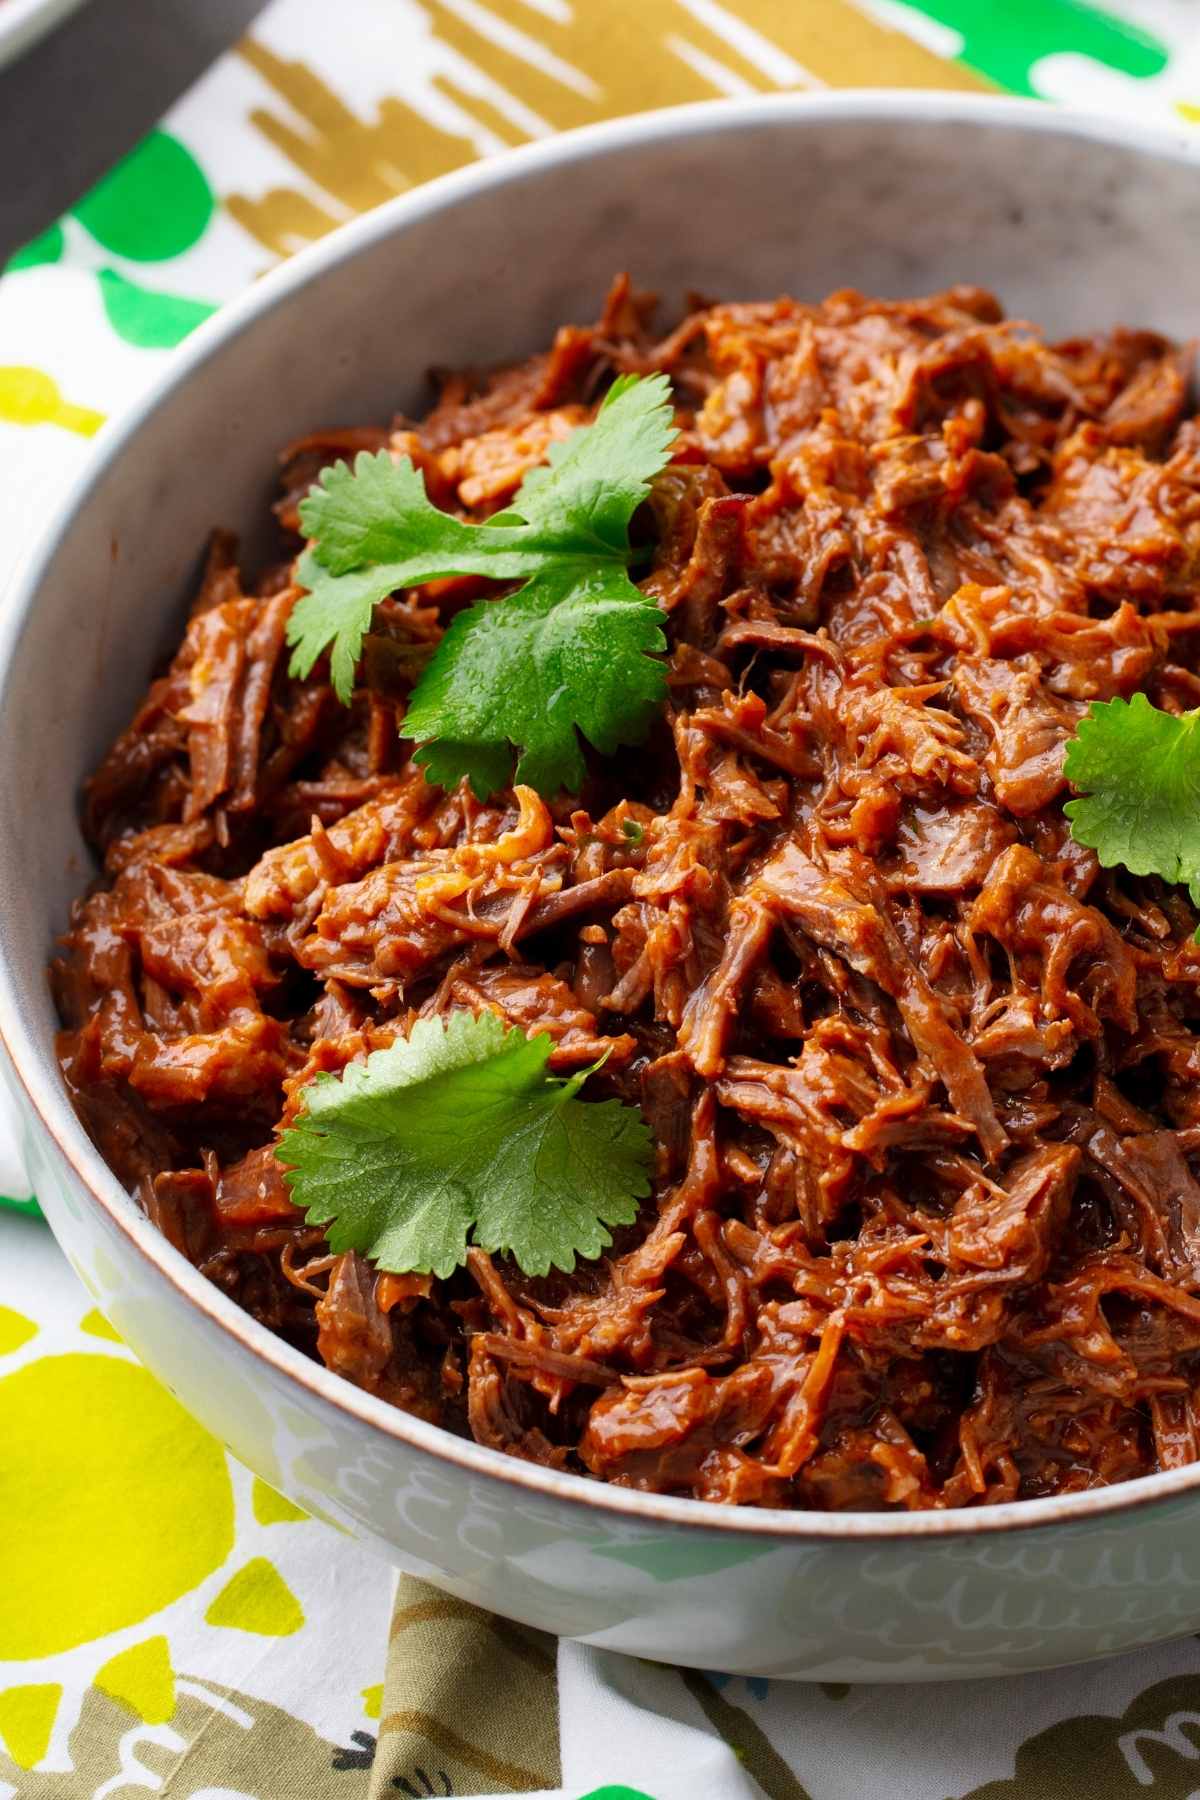 If you’re a fan of shredded beef, you’ll want to give this Mexican Shredded Beef recipe a try! Also called Machacha, it is full of delicious Mexican flavor and would be the perfect dish to feed a crowd on game day!